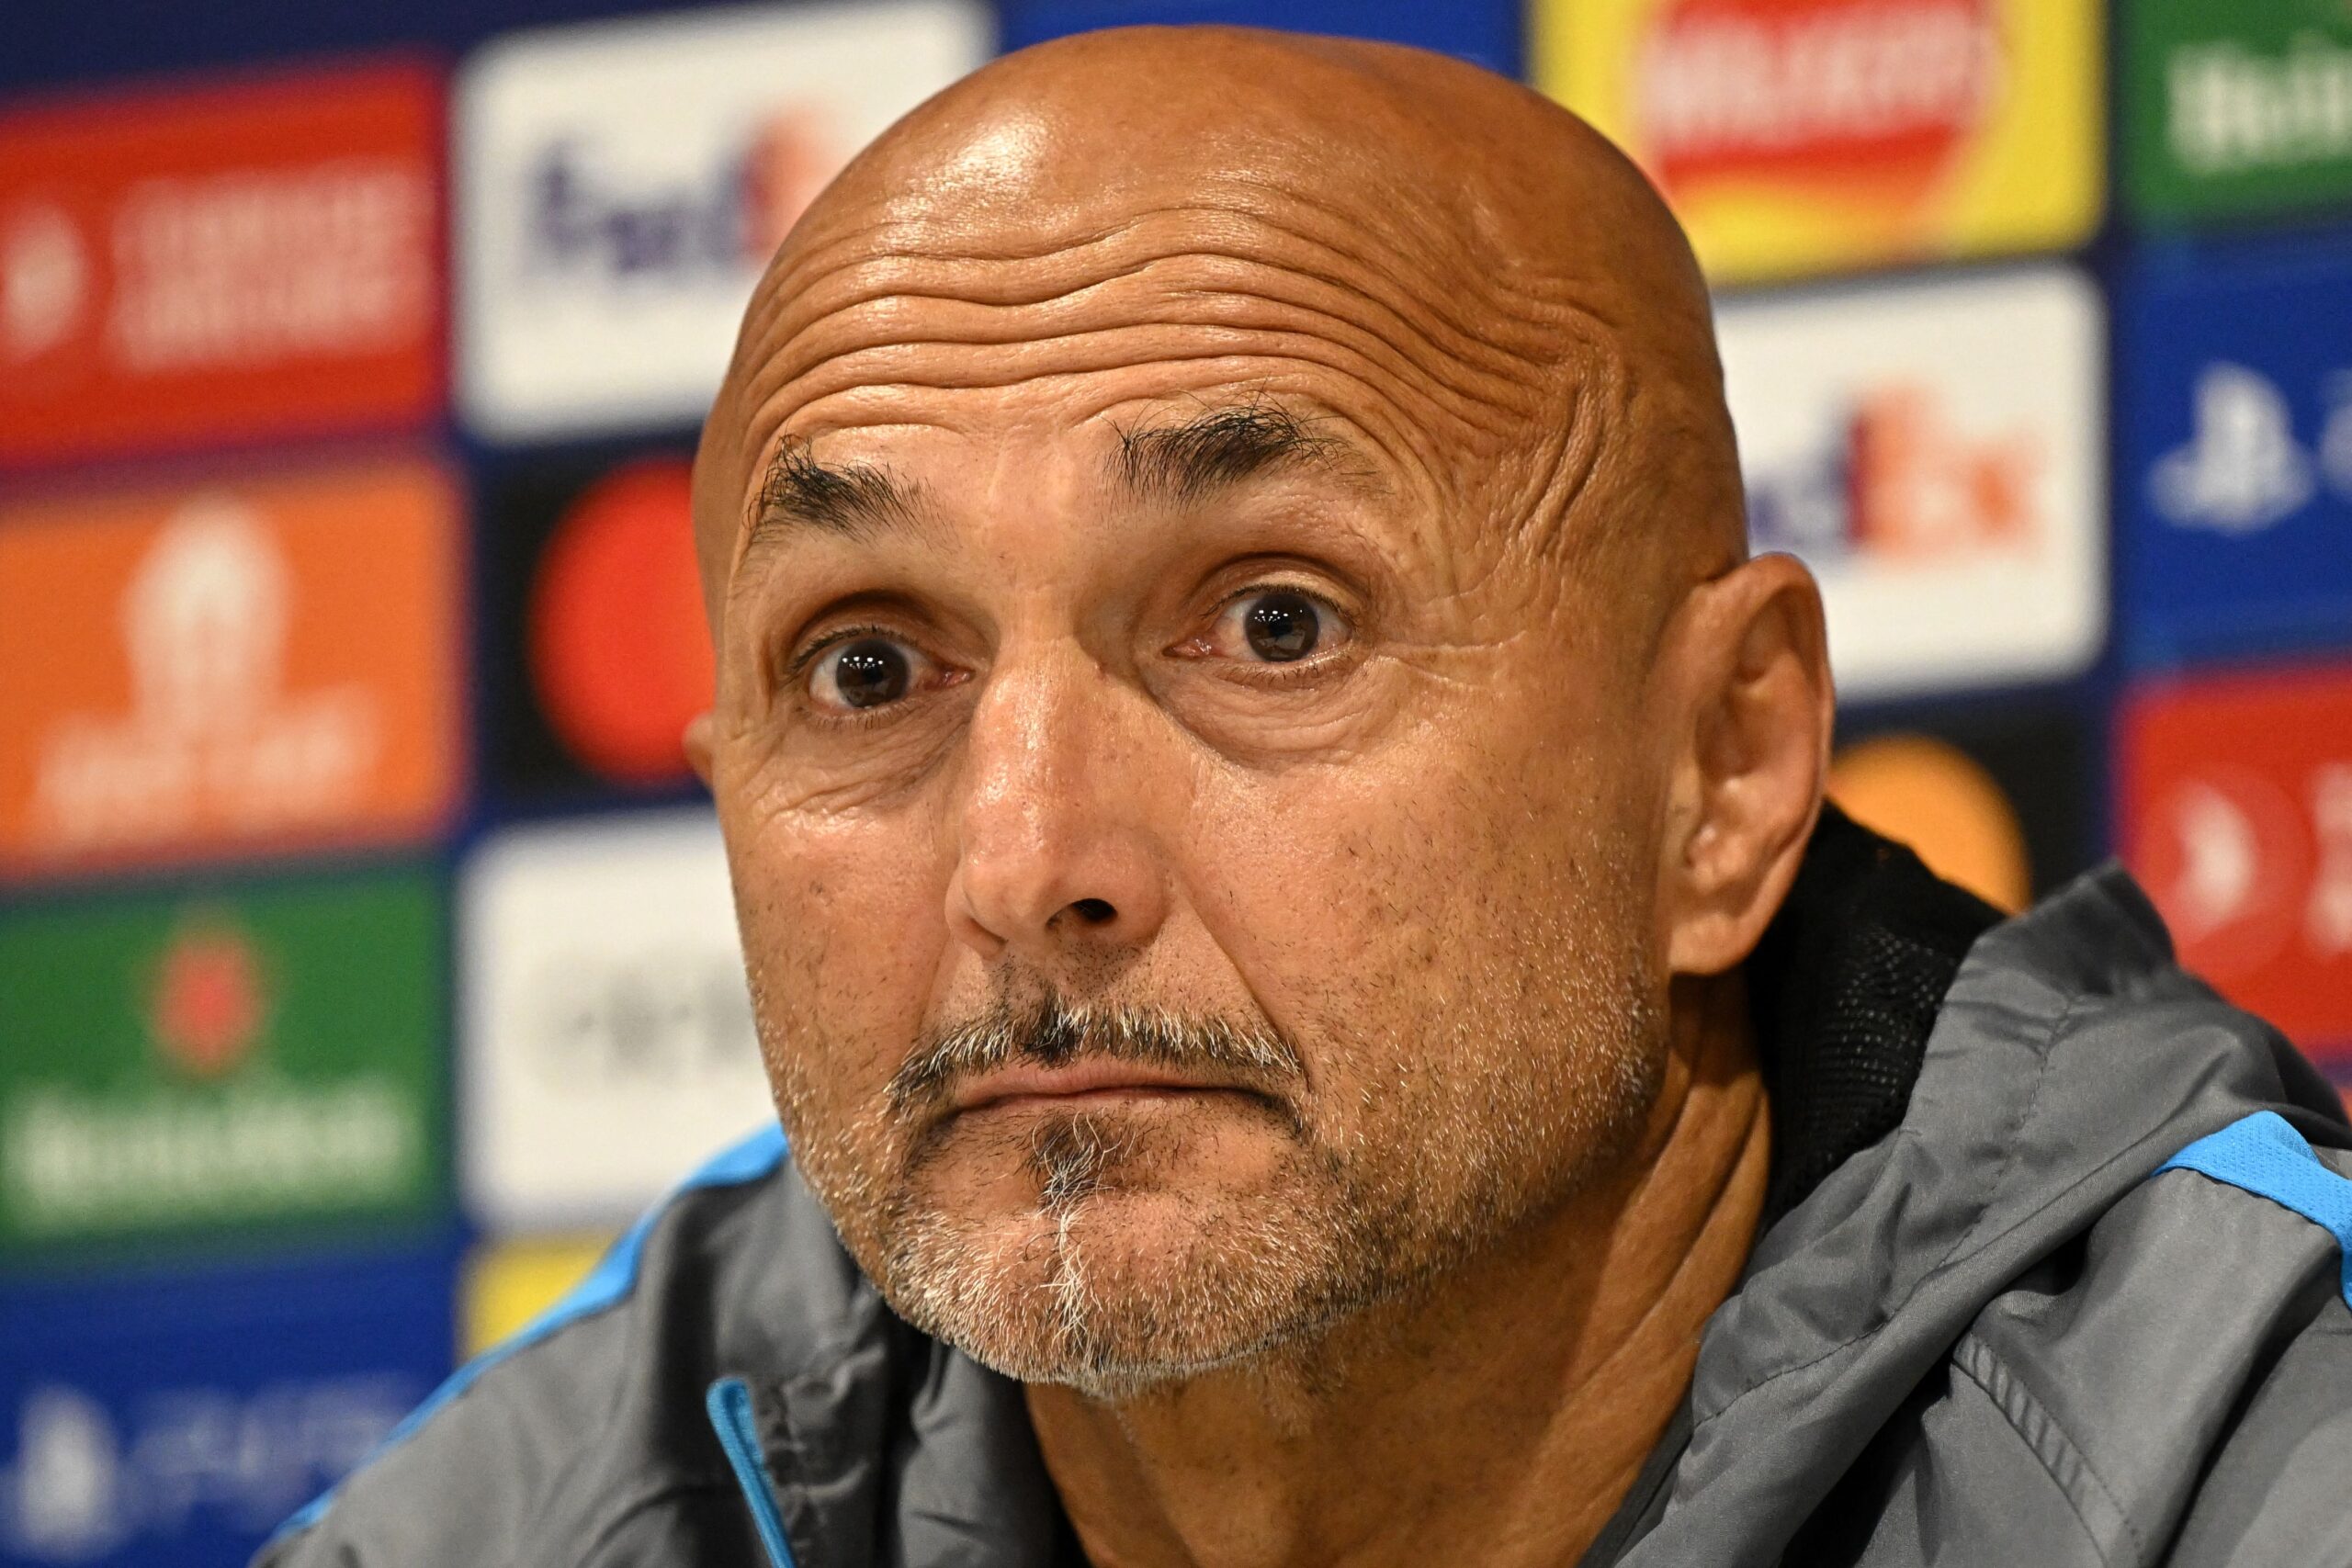 “This is how you win the scudetto,” Spalletti then comments